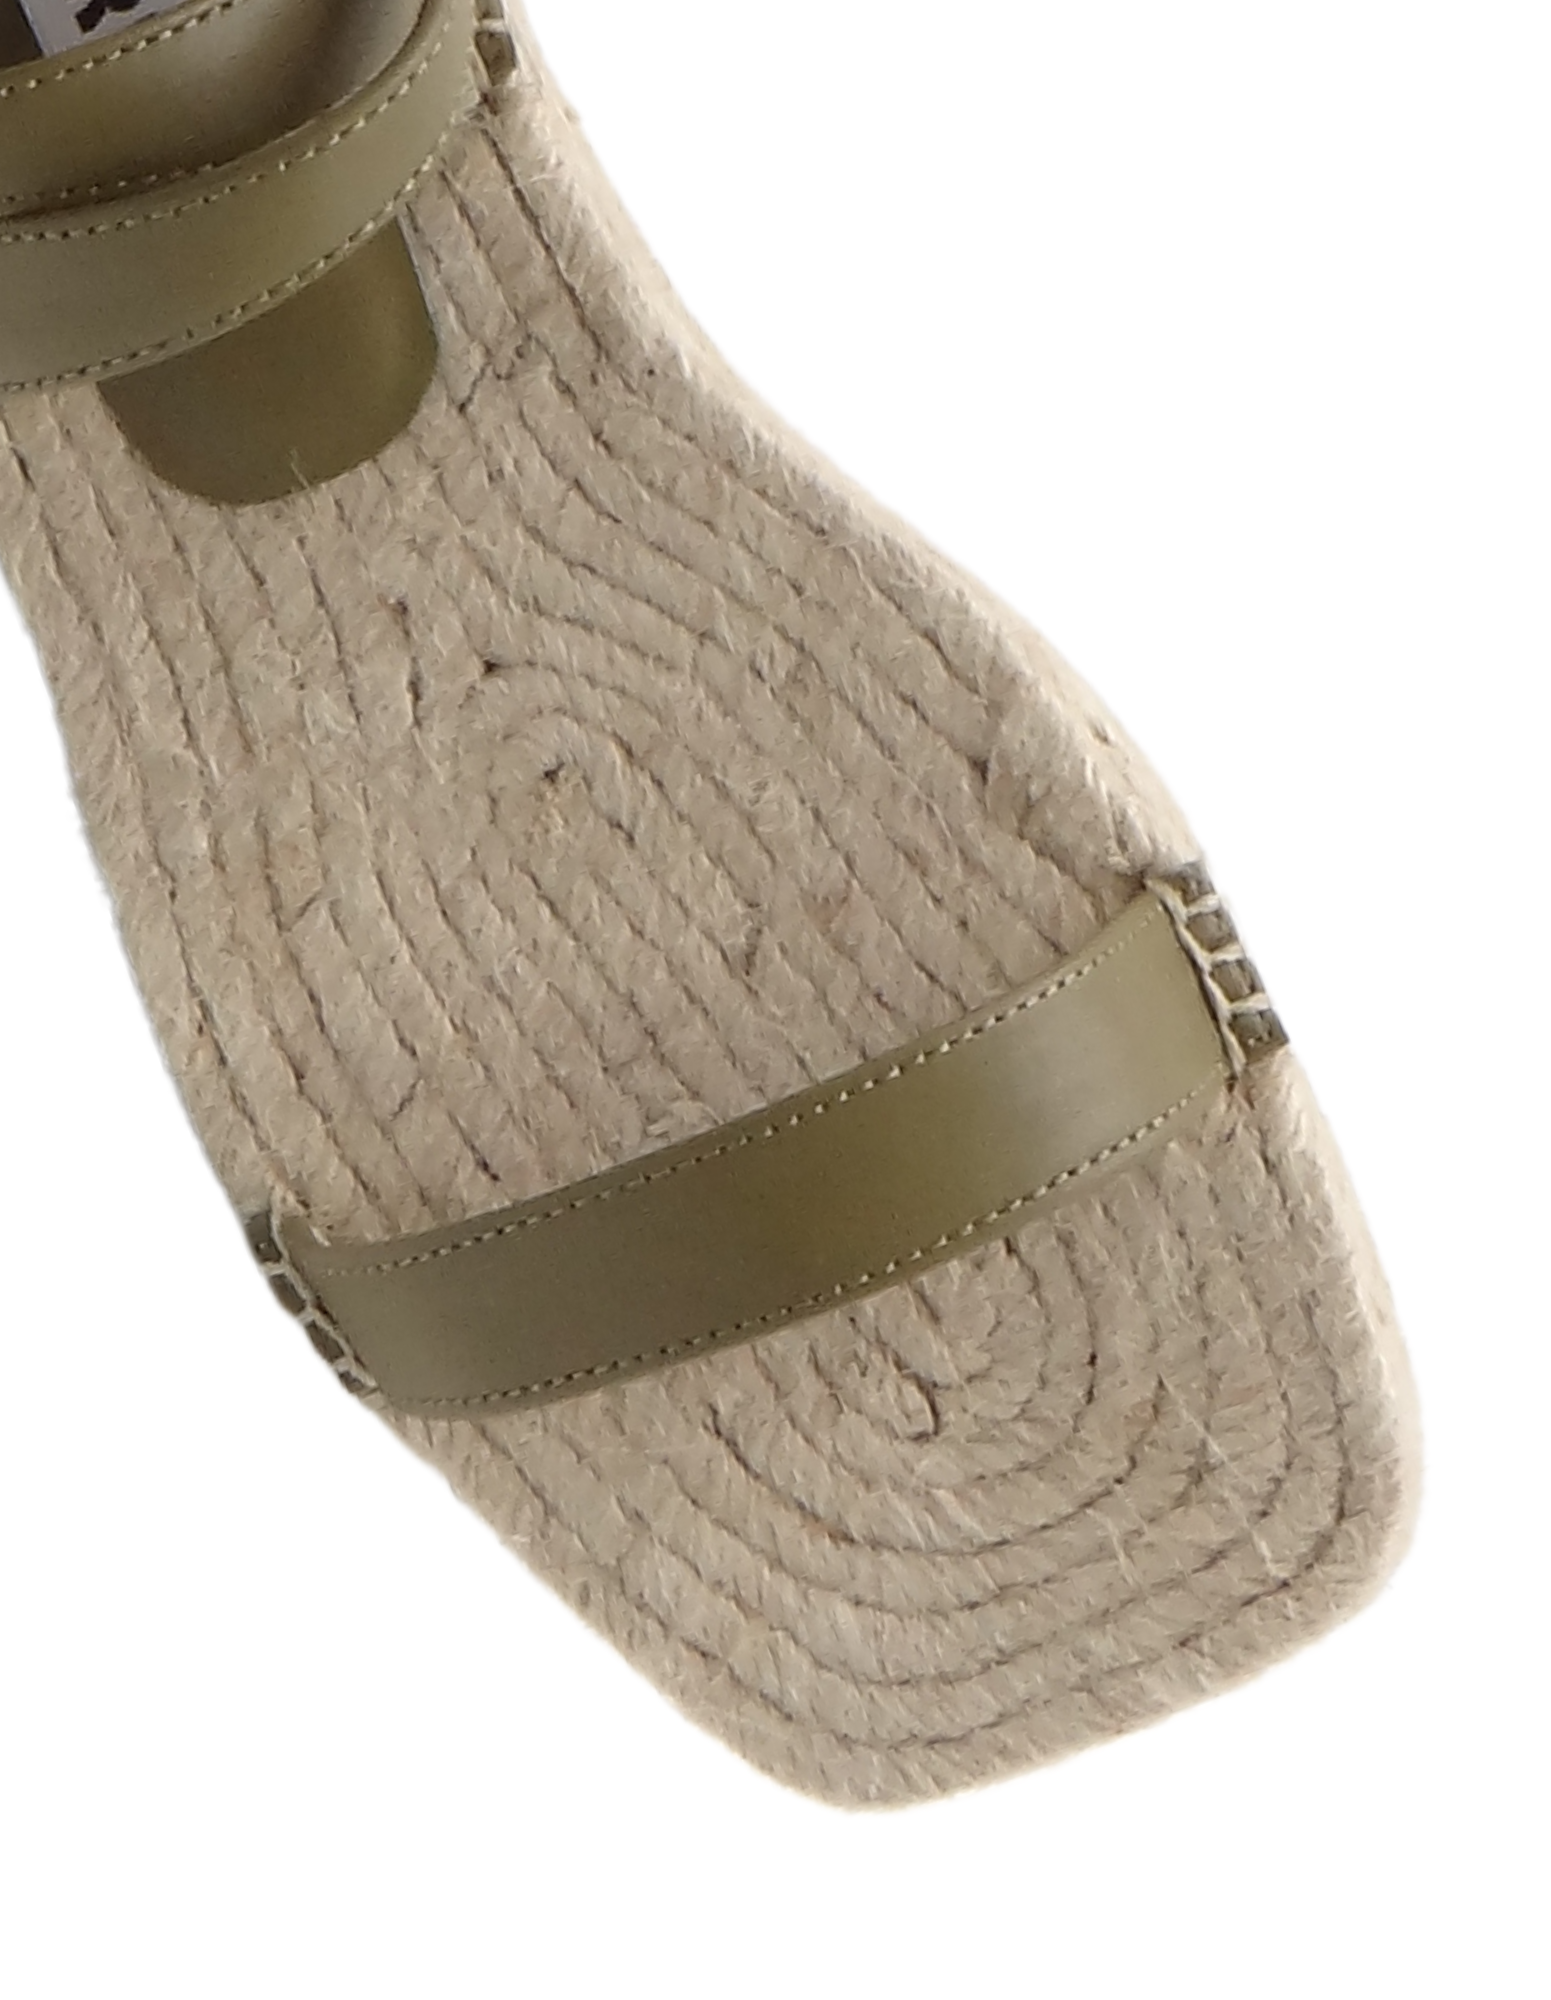 CAVERLEY Jude Espadrille in Olive 23S510C Olive FROM EIGHTYWINGOLD - OFFICIAL BRAND PARTNER